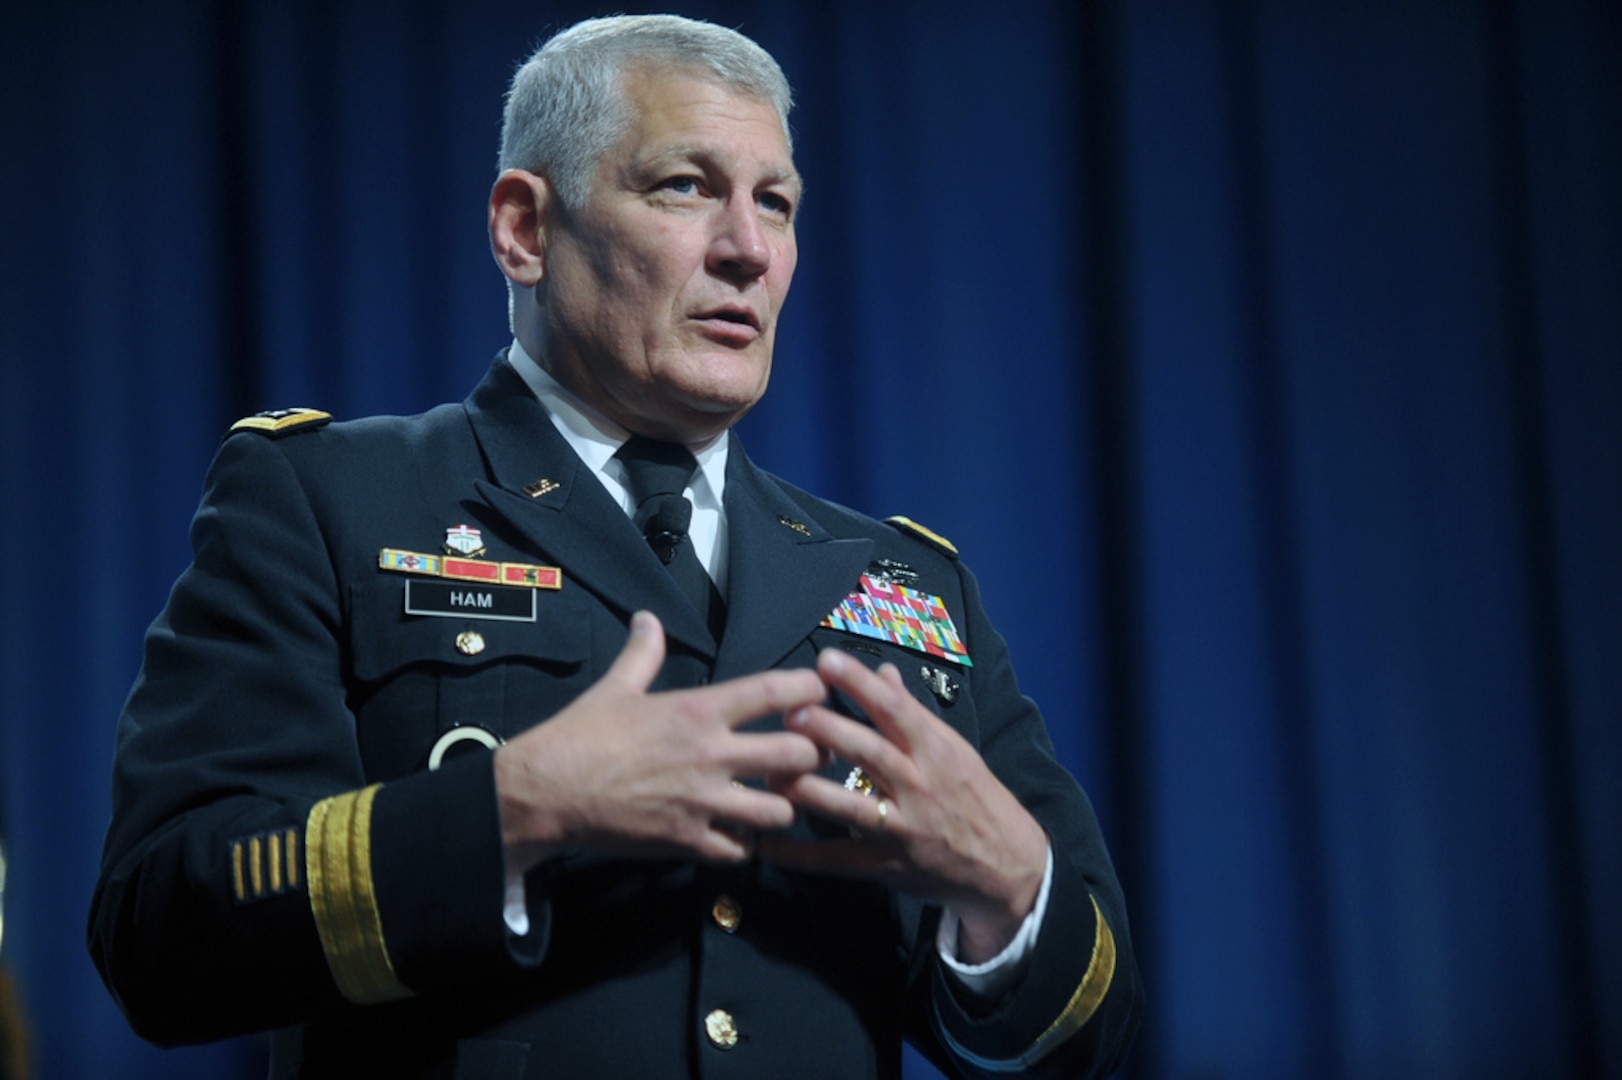 Army Gen. Carter Ham, combatant commander, U.S. Africa Command, addresses the 134th National Guard Association of the United States General Conference in Reno, Nev., on Sept. 10, 2012.